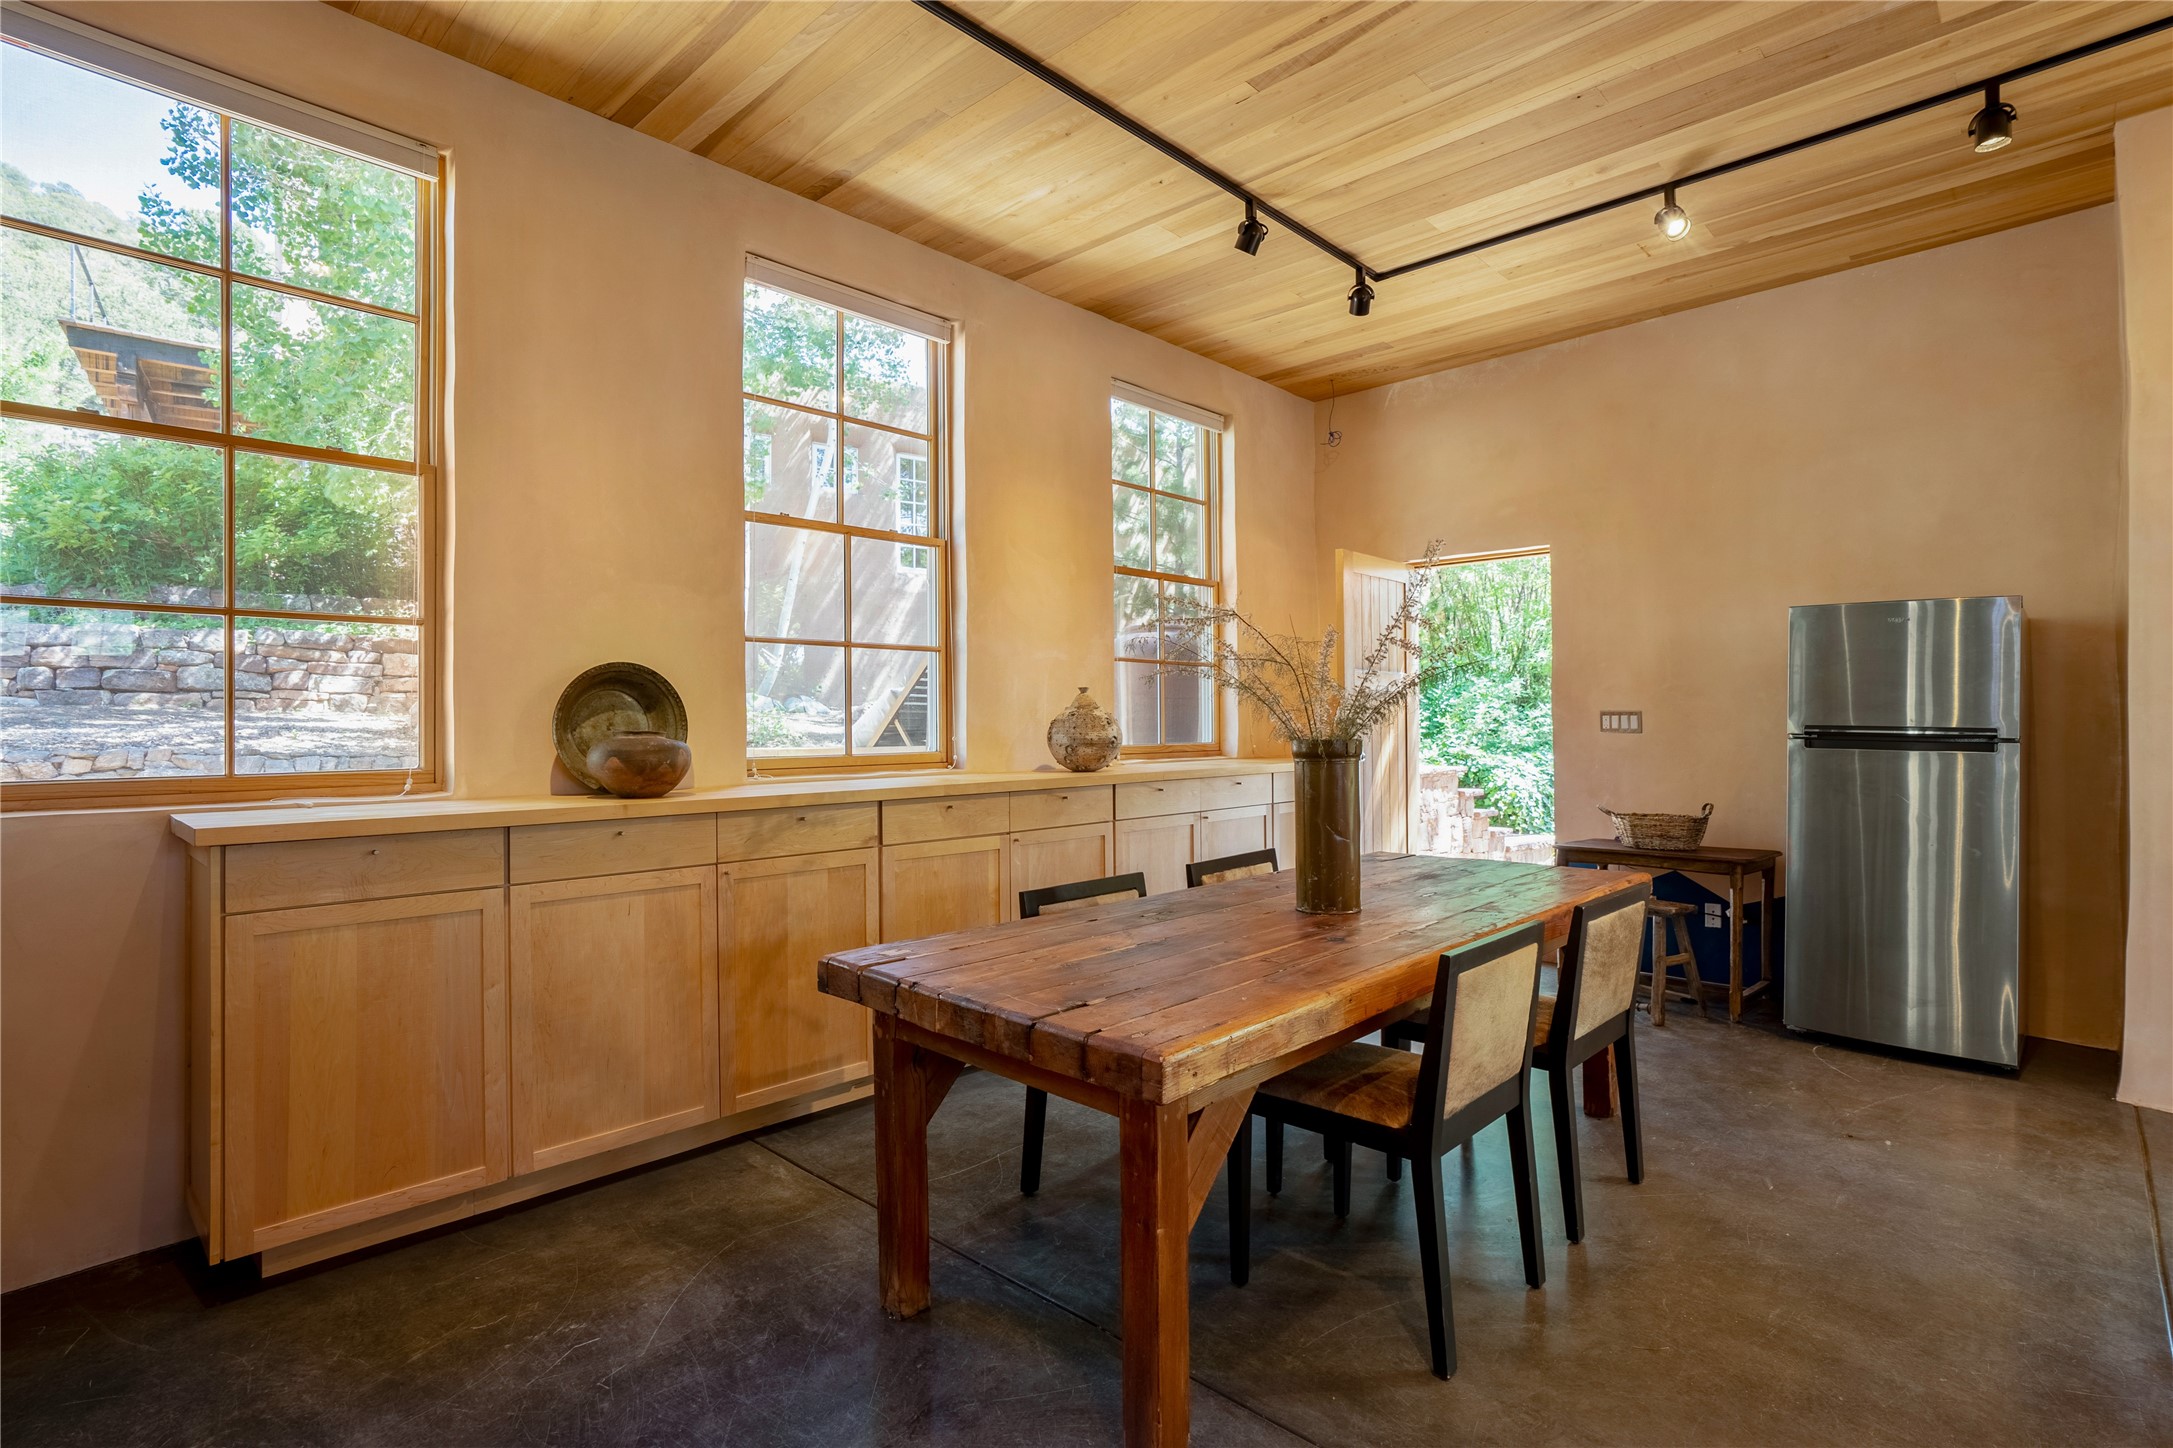 1710 Upper Canyon Road B, Santa Fe, New Mexico 87501, 2 Bedrooms Bedrooms, ,1 BathroomBathrooms,Residential,For Sale,1710 Upper Canyon Road B,202231900